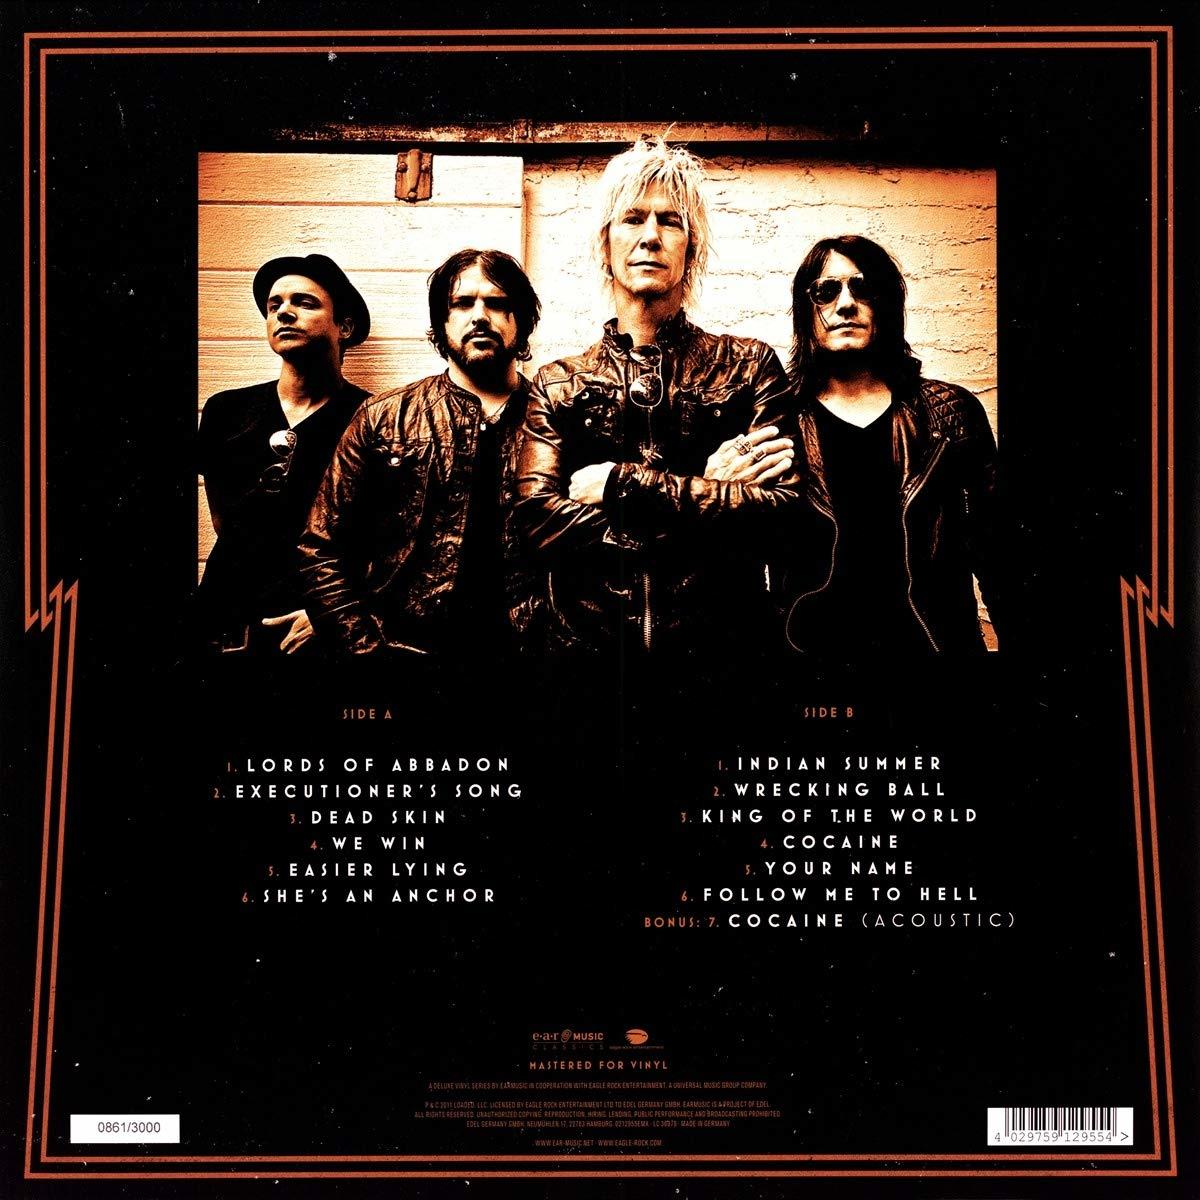 Duff Mckagan\'s Loaded - The LP+CD) Taking - (Vinyl) (Limited